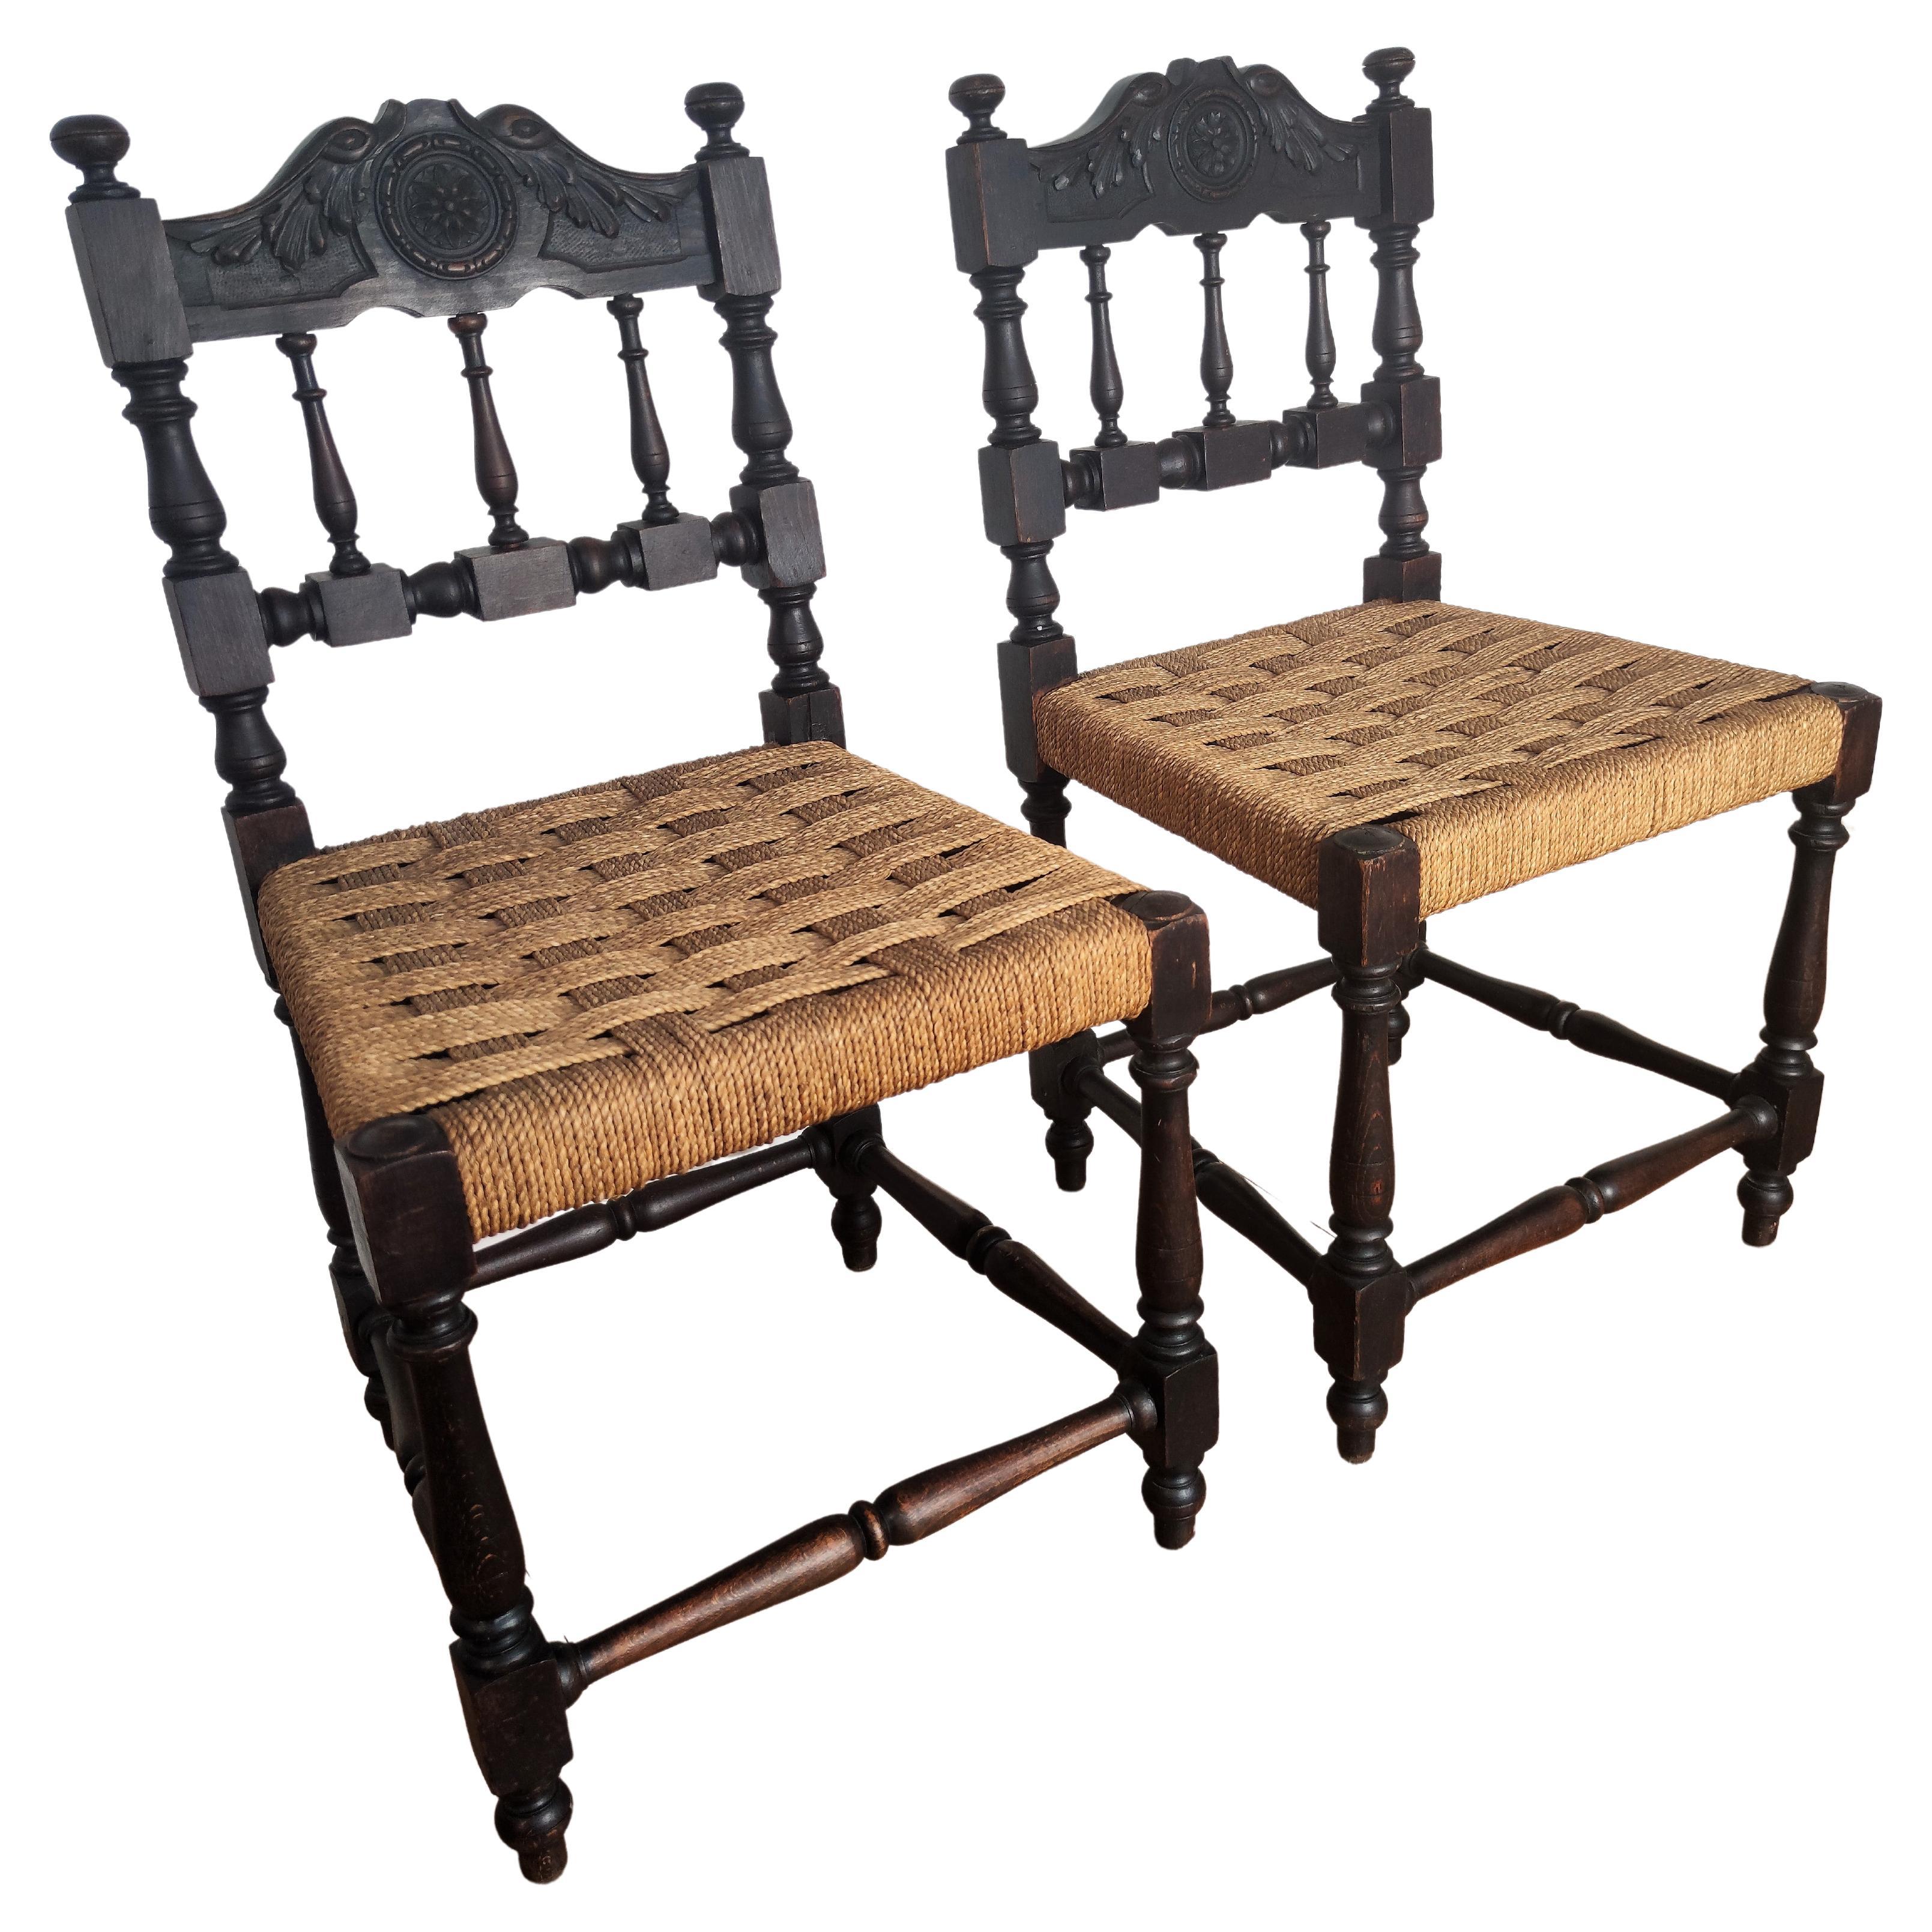 Pair of 1960s Italian Midcentury Carved Wood and Cord Woven Rope Chairs Stools For Sale